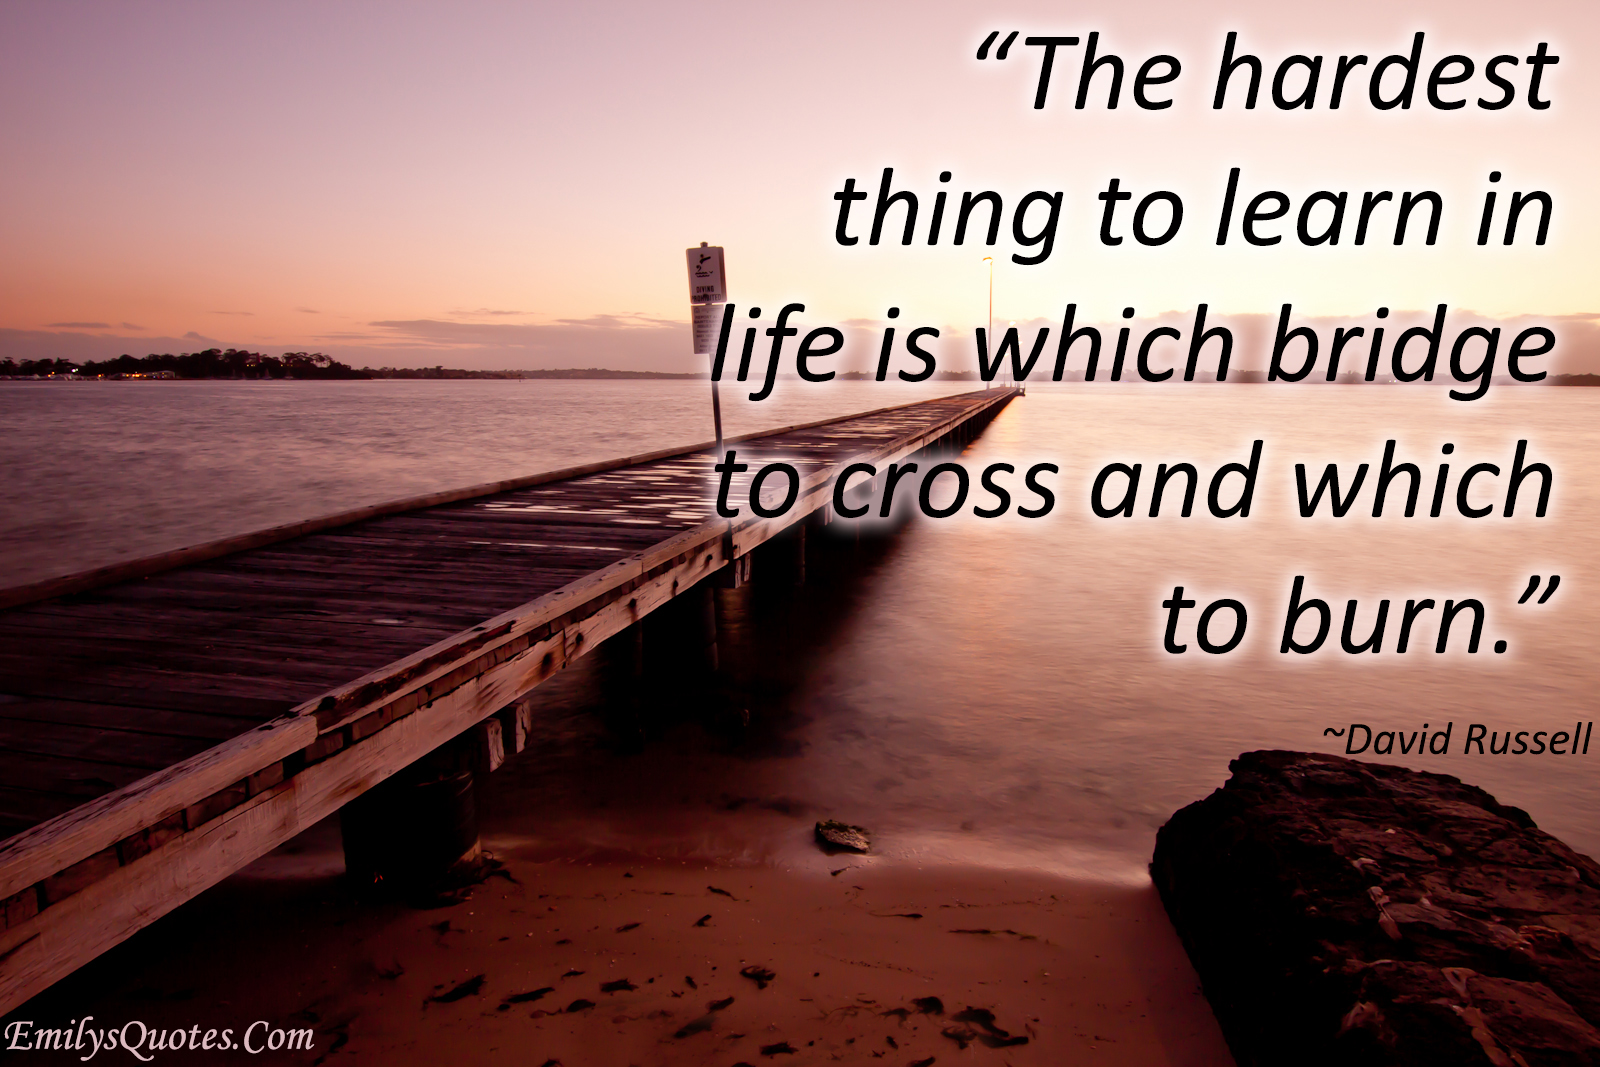 The hardest thing to learn in life is which bridge to cross and which to burn